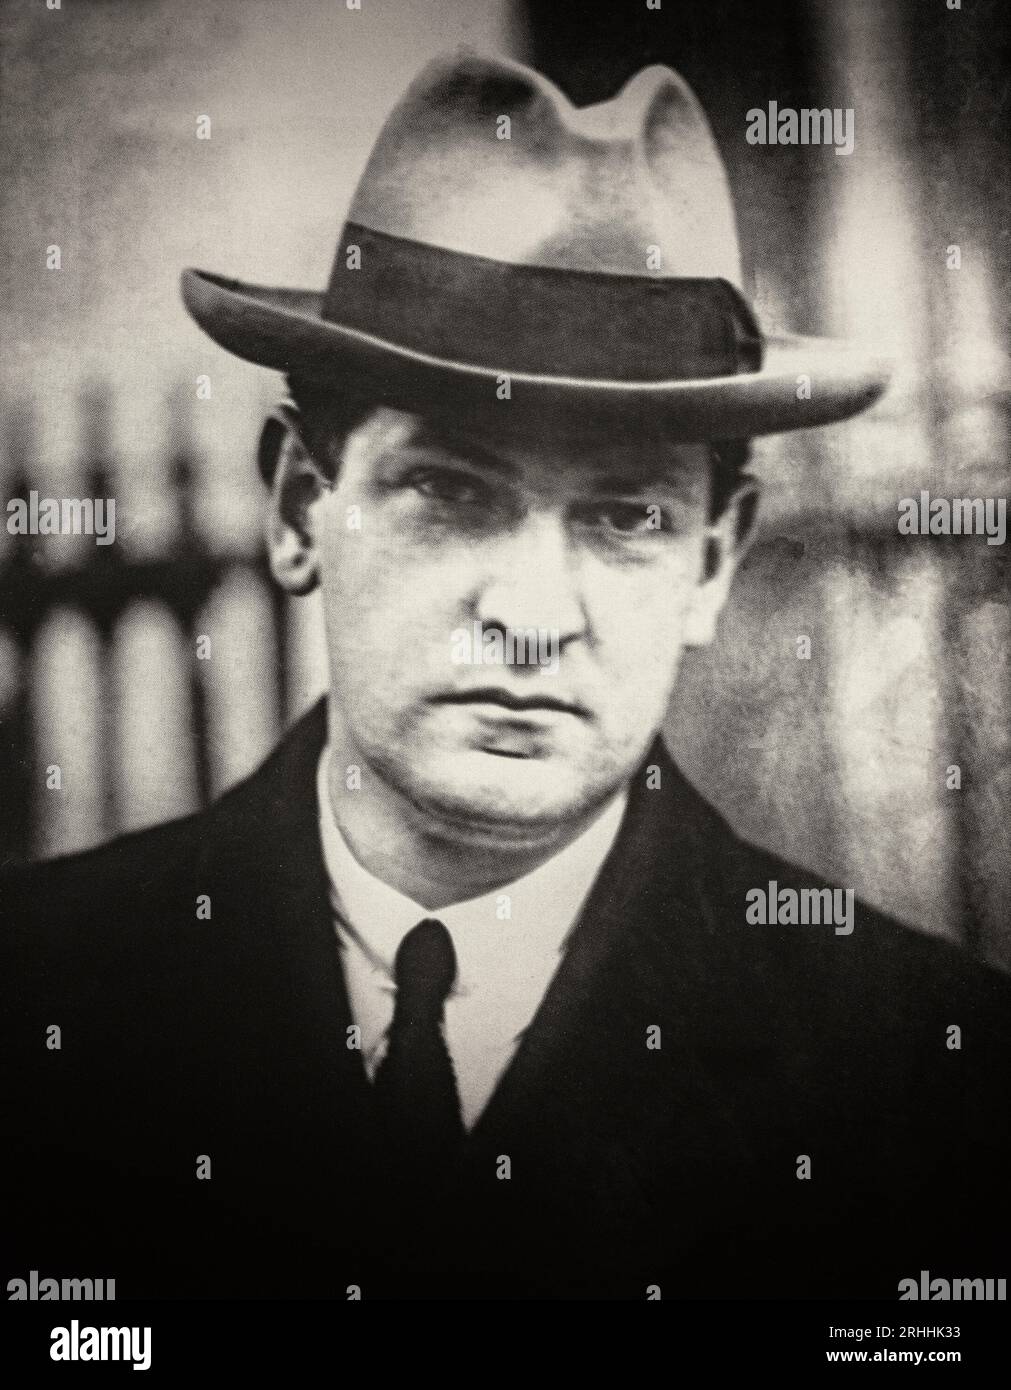 An early 20th century photograph of Michael Collins (1890-1922), Irish revolutionary, soldier and politician. A leading figure in the early-20th century struggle for Irish independence who travelled to the London peace conference to negotiate a treaty. The negotiations ultimately resulted in the Anglo-Irish Treaty which was signed on 6 December 1921. He died in an ambush in August 1922, during the Civil War that resulted from the treaty. Stock Photo